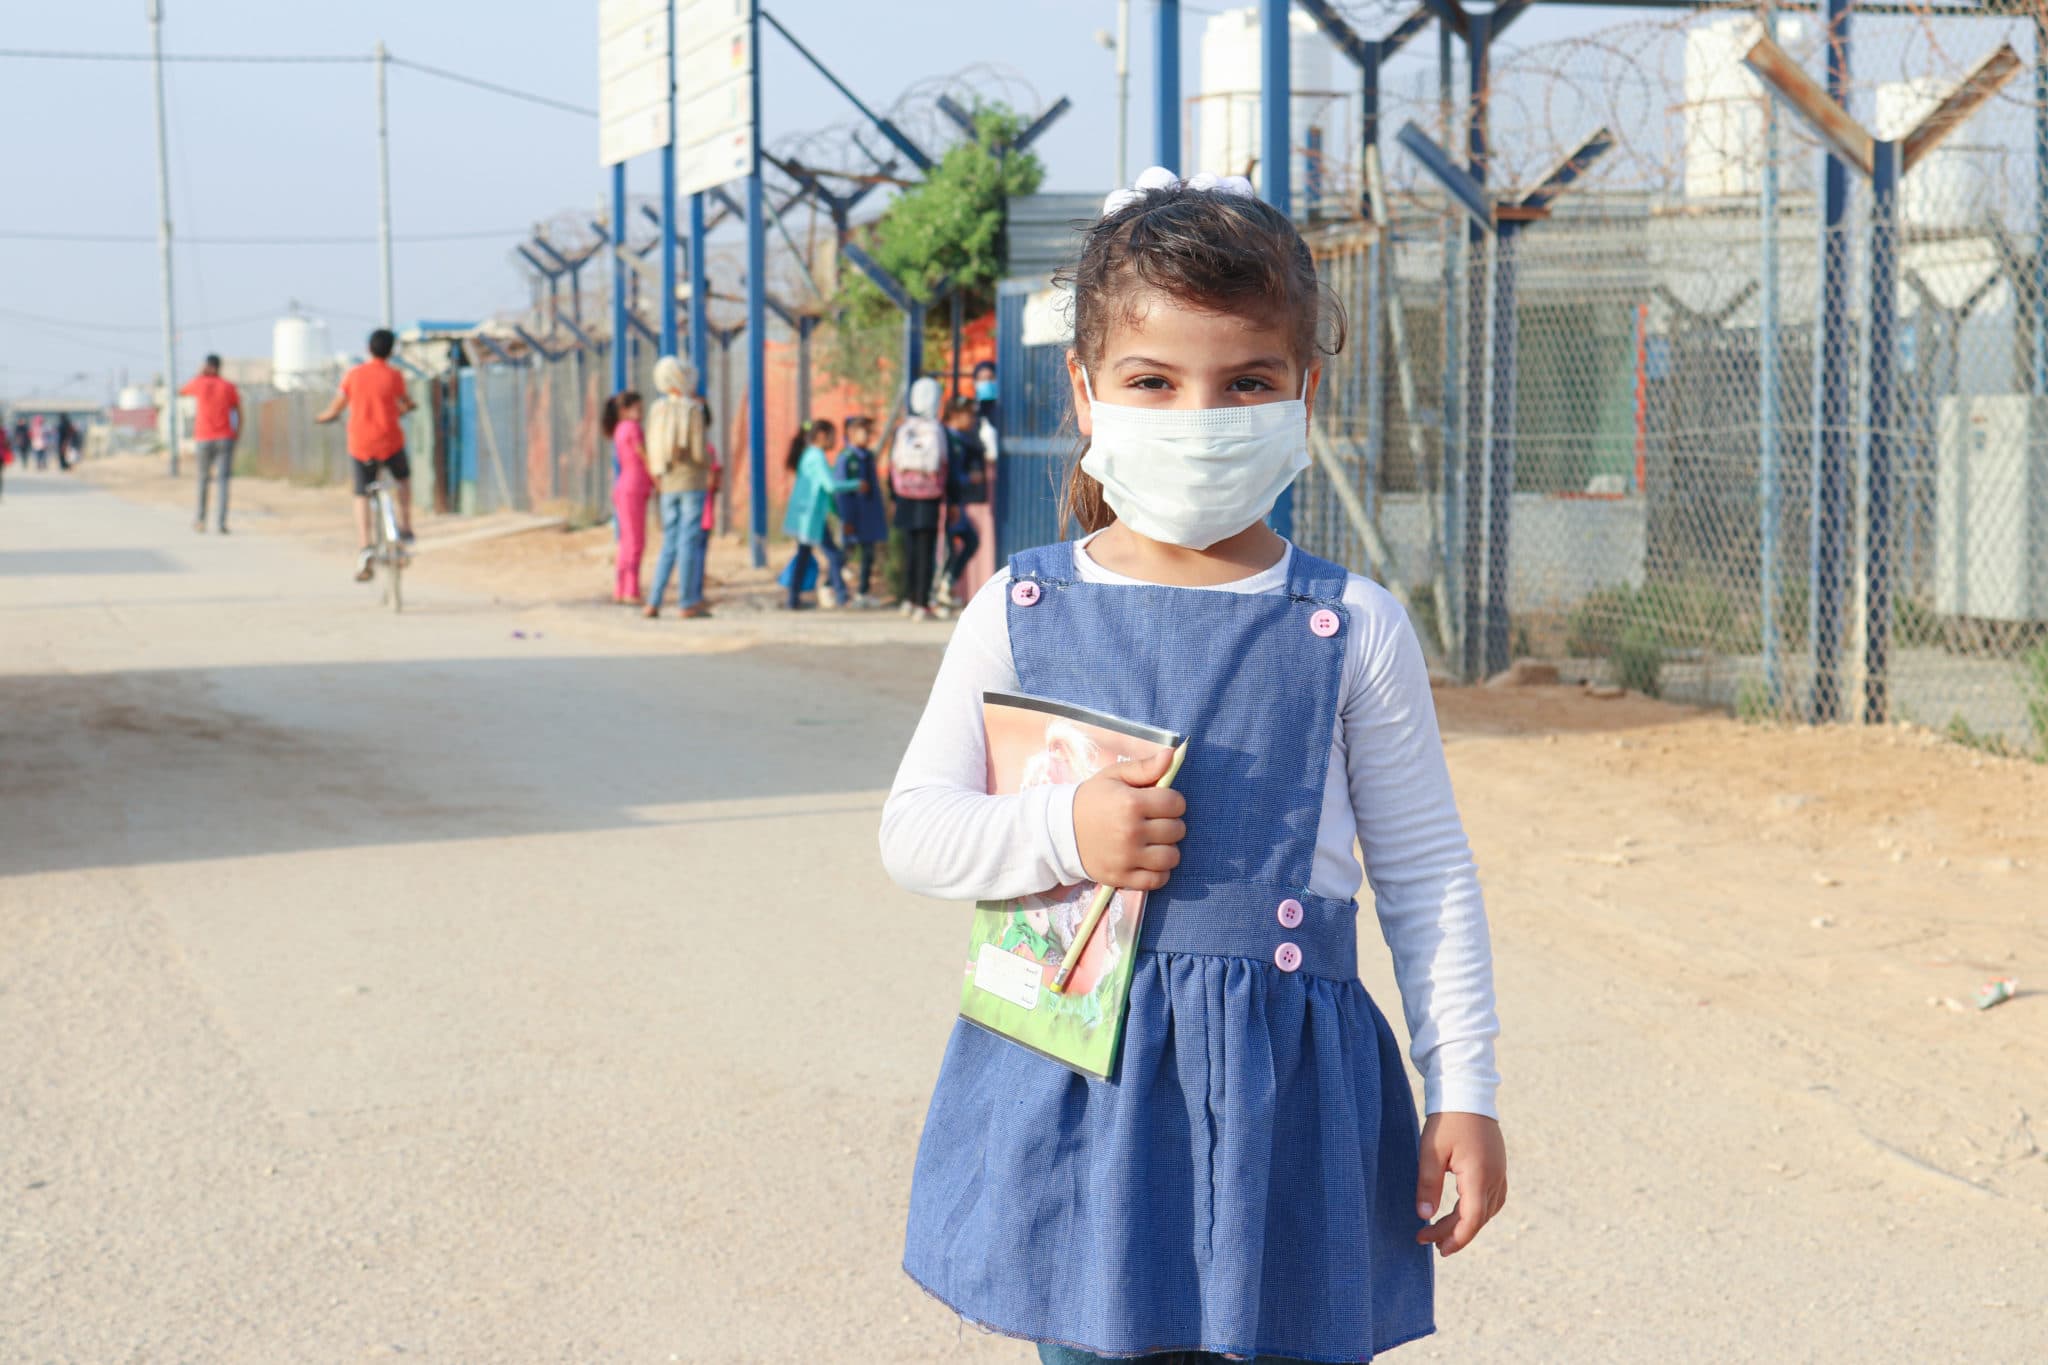 A Syrian refugee girl returns to school to receive an education